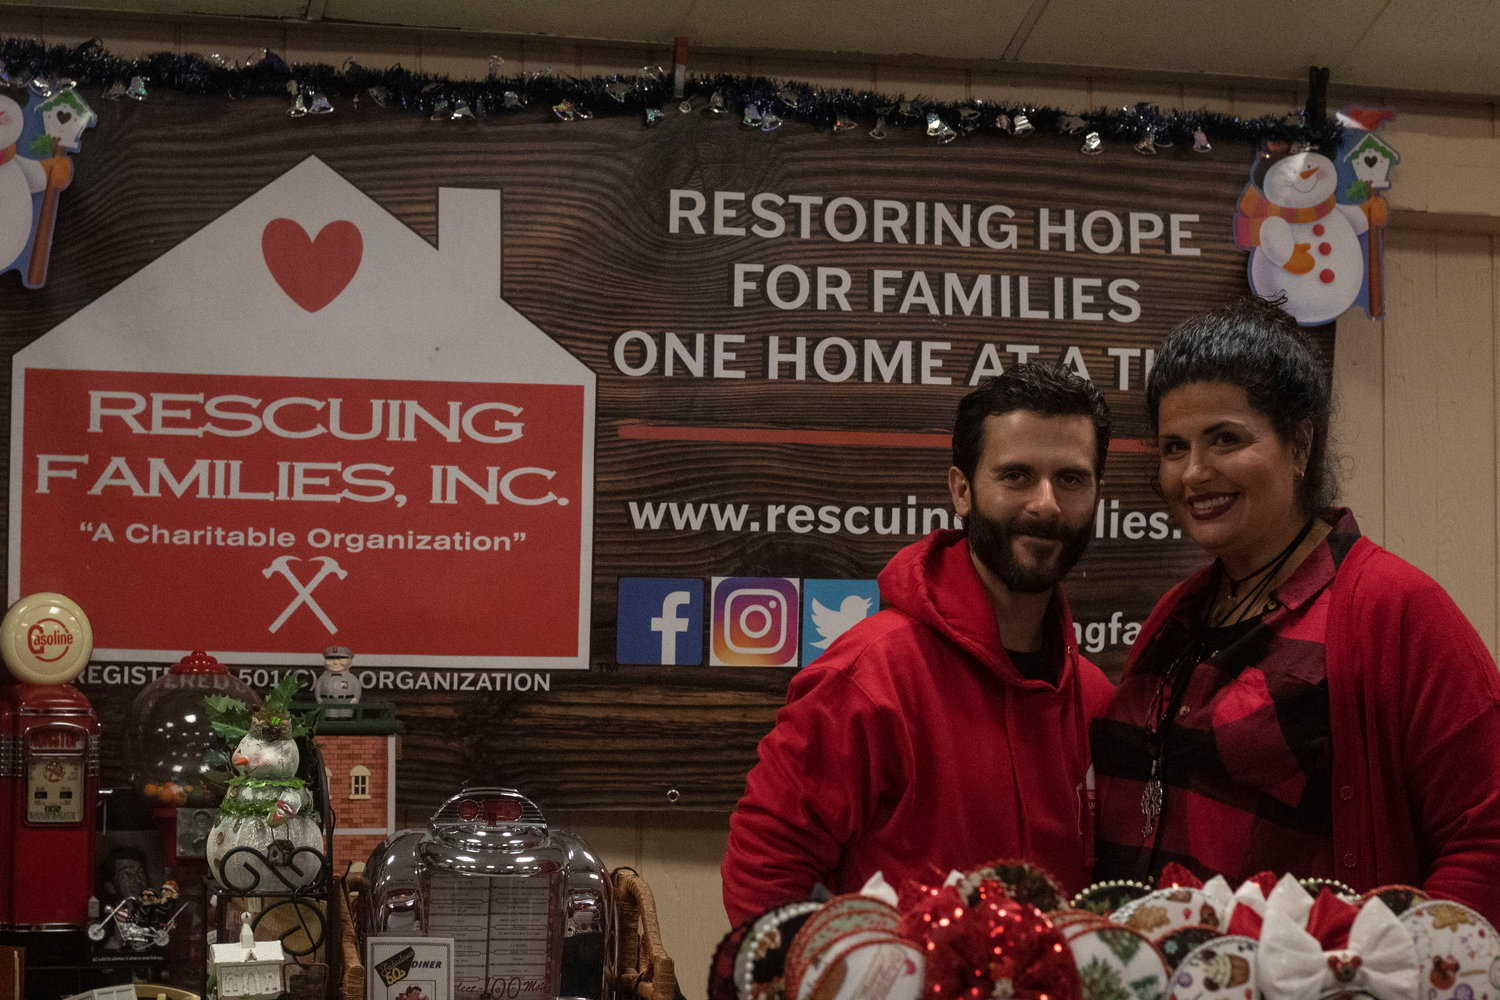 The hosts of the Holiday Gift Boutique and founders of Rescuing Families, Inc., Vincent Centauro and Gina Centauro.